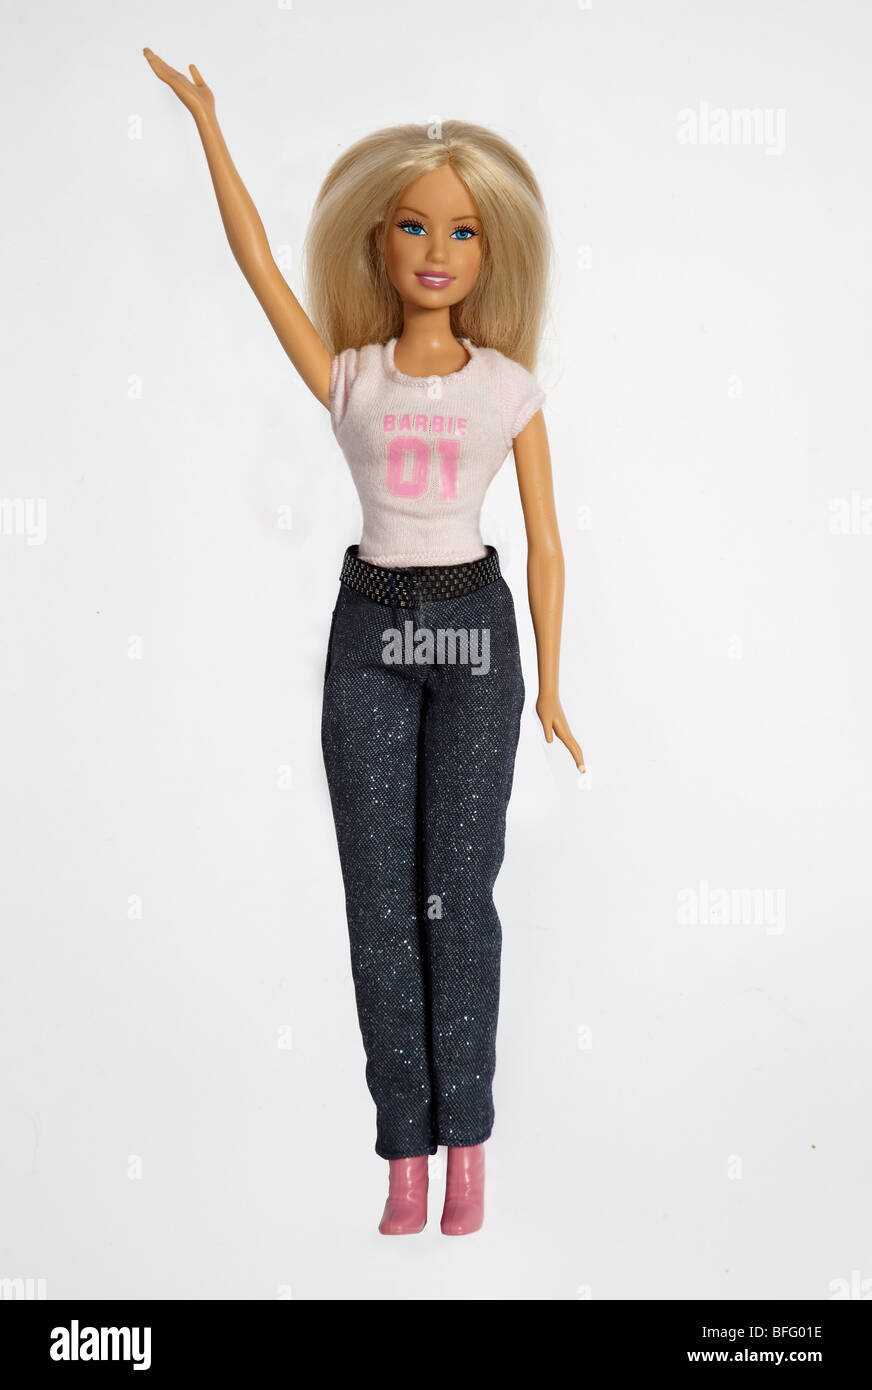 Barbie Doll wearing jeans and a top with arm raised Stock Photo - Alamy